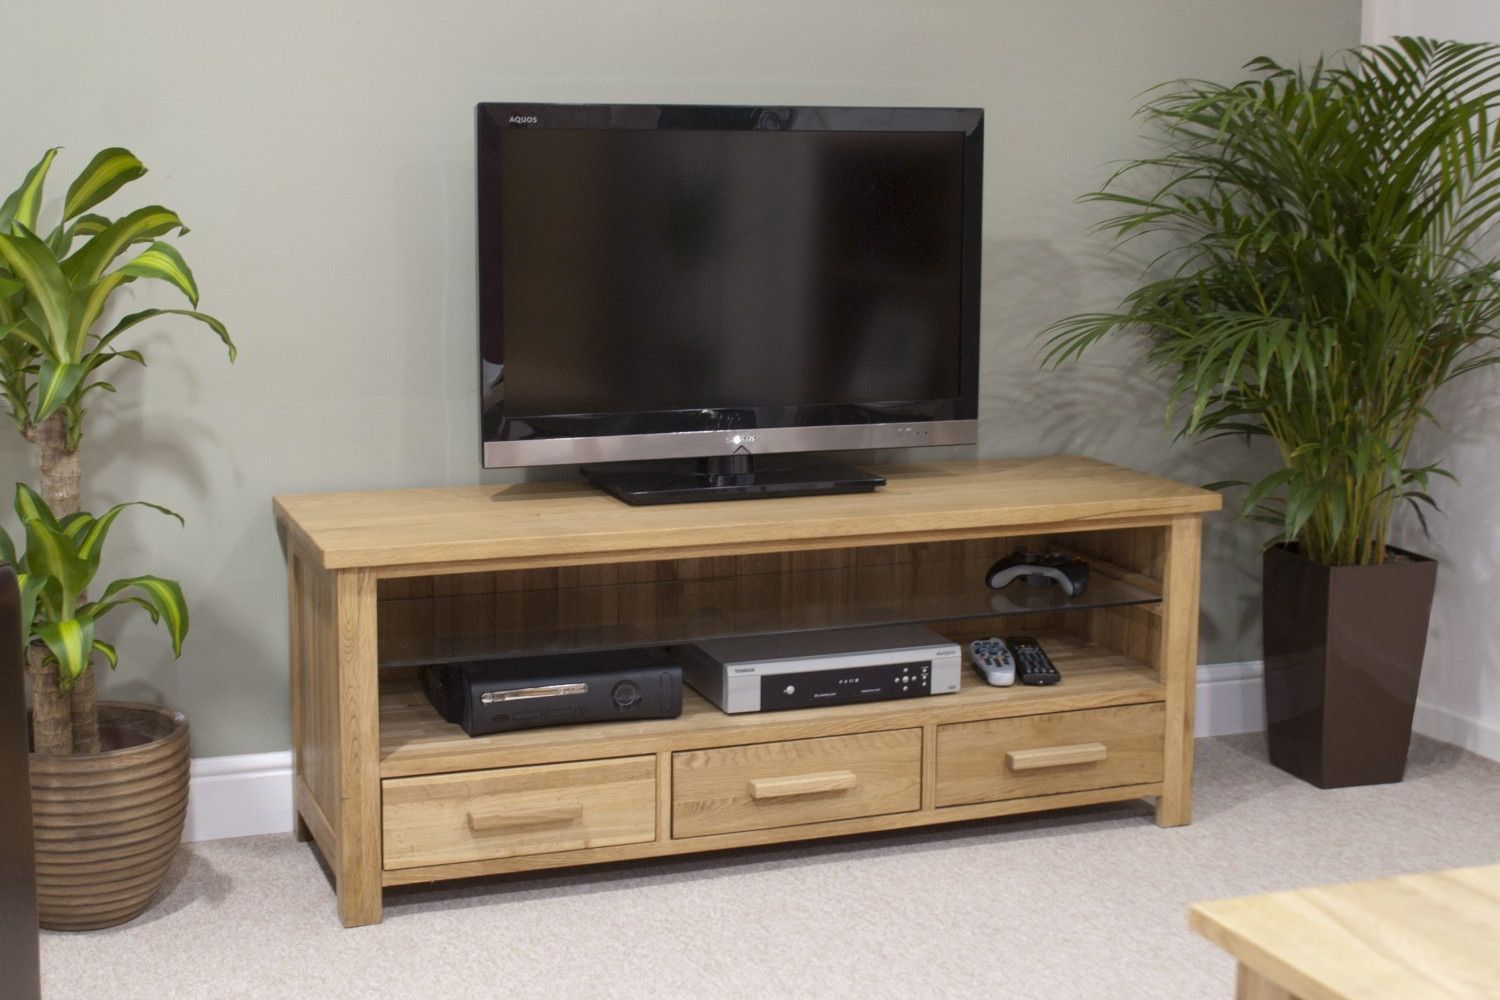 Eton Solid Oak Living Room Furniture Widescreen Tv Cabinet With Regard To Widescreen Tv Stands (View 4 of 15)